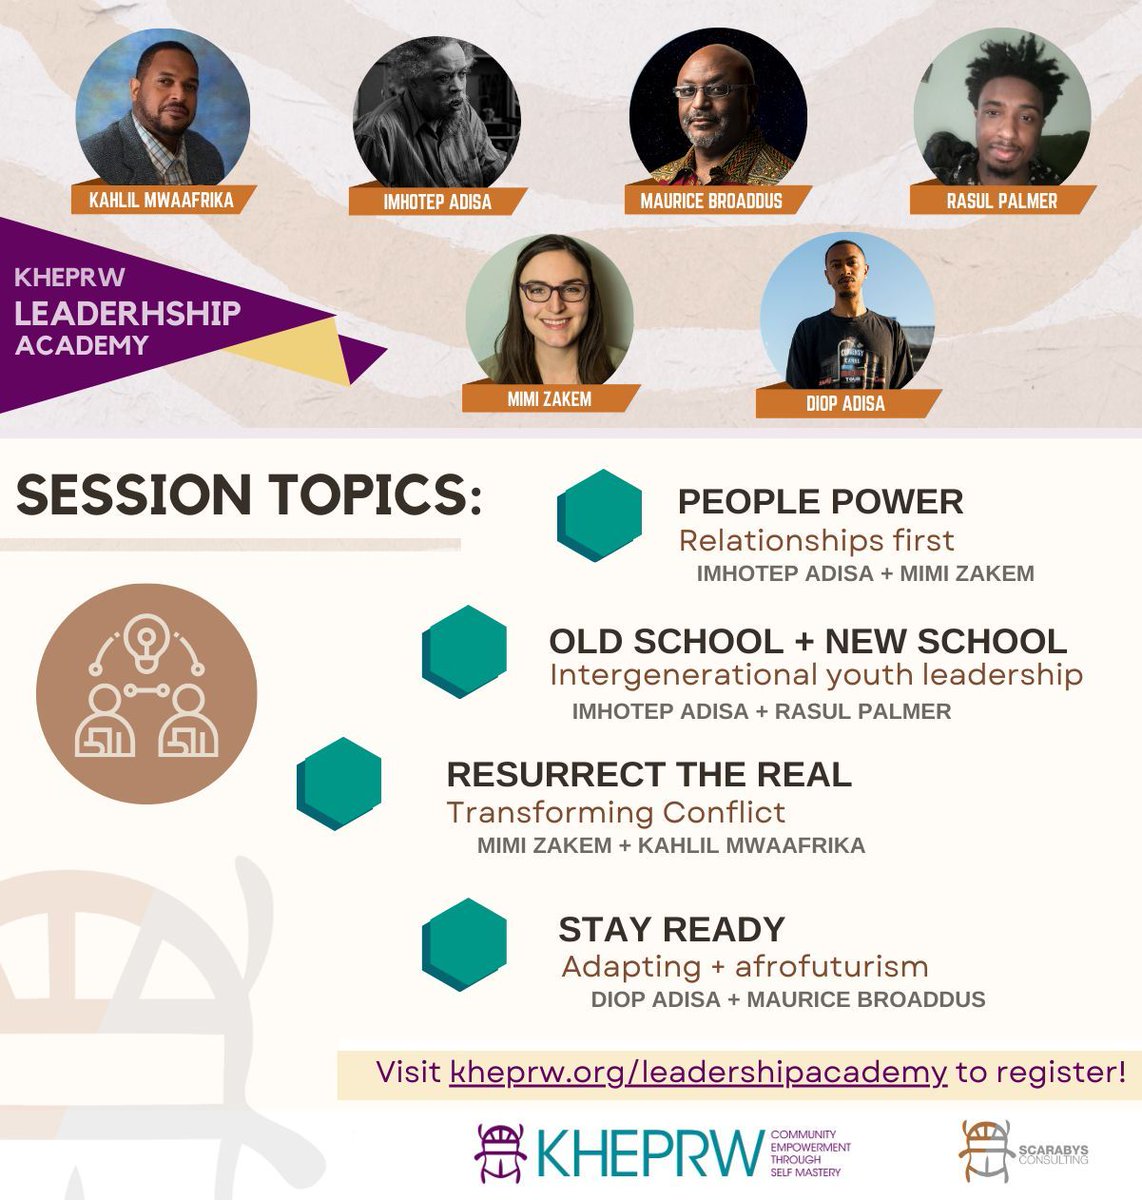 For over 20 years the Kheprw Institute has been dedicated to mastering the art of intergenerational community wealth building. Now you have an opportunity to join us on that path. Sign up for the Kheprw Leadership Academy today! Visit bit.ly/3SGnfRi to learn more.